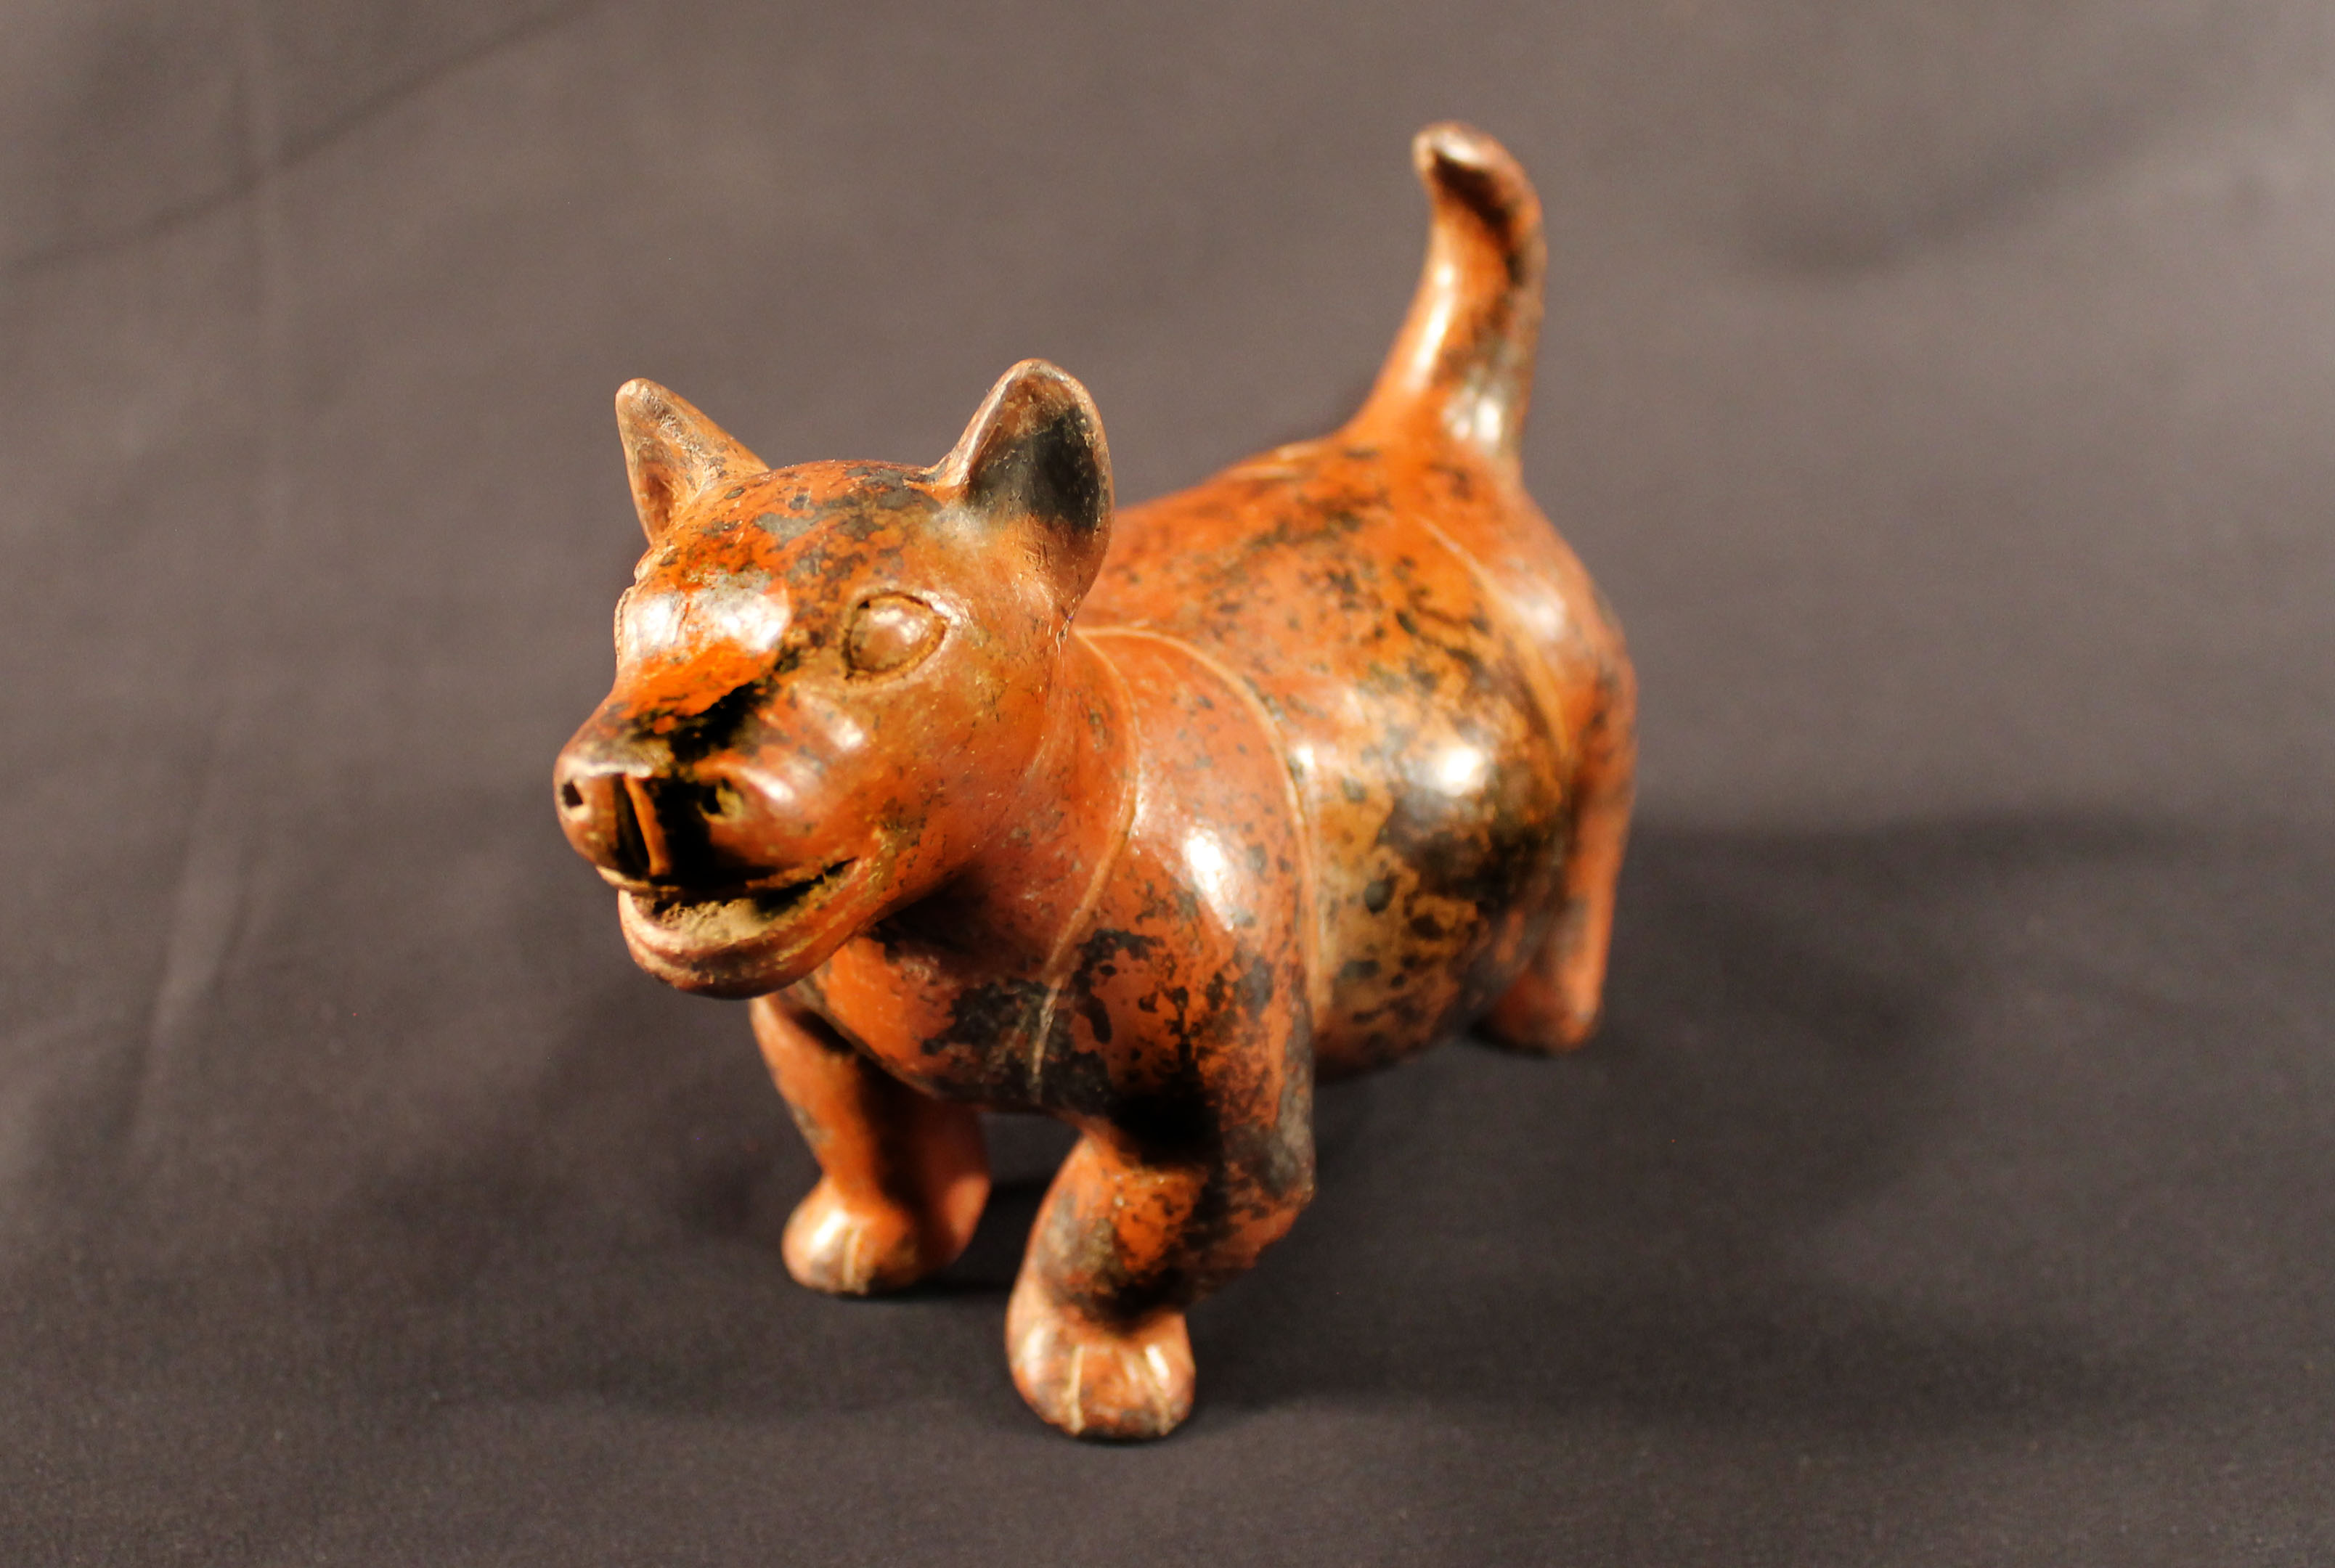 Red earthenware statute of a smiling chubby dog.